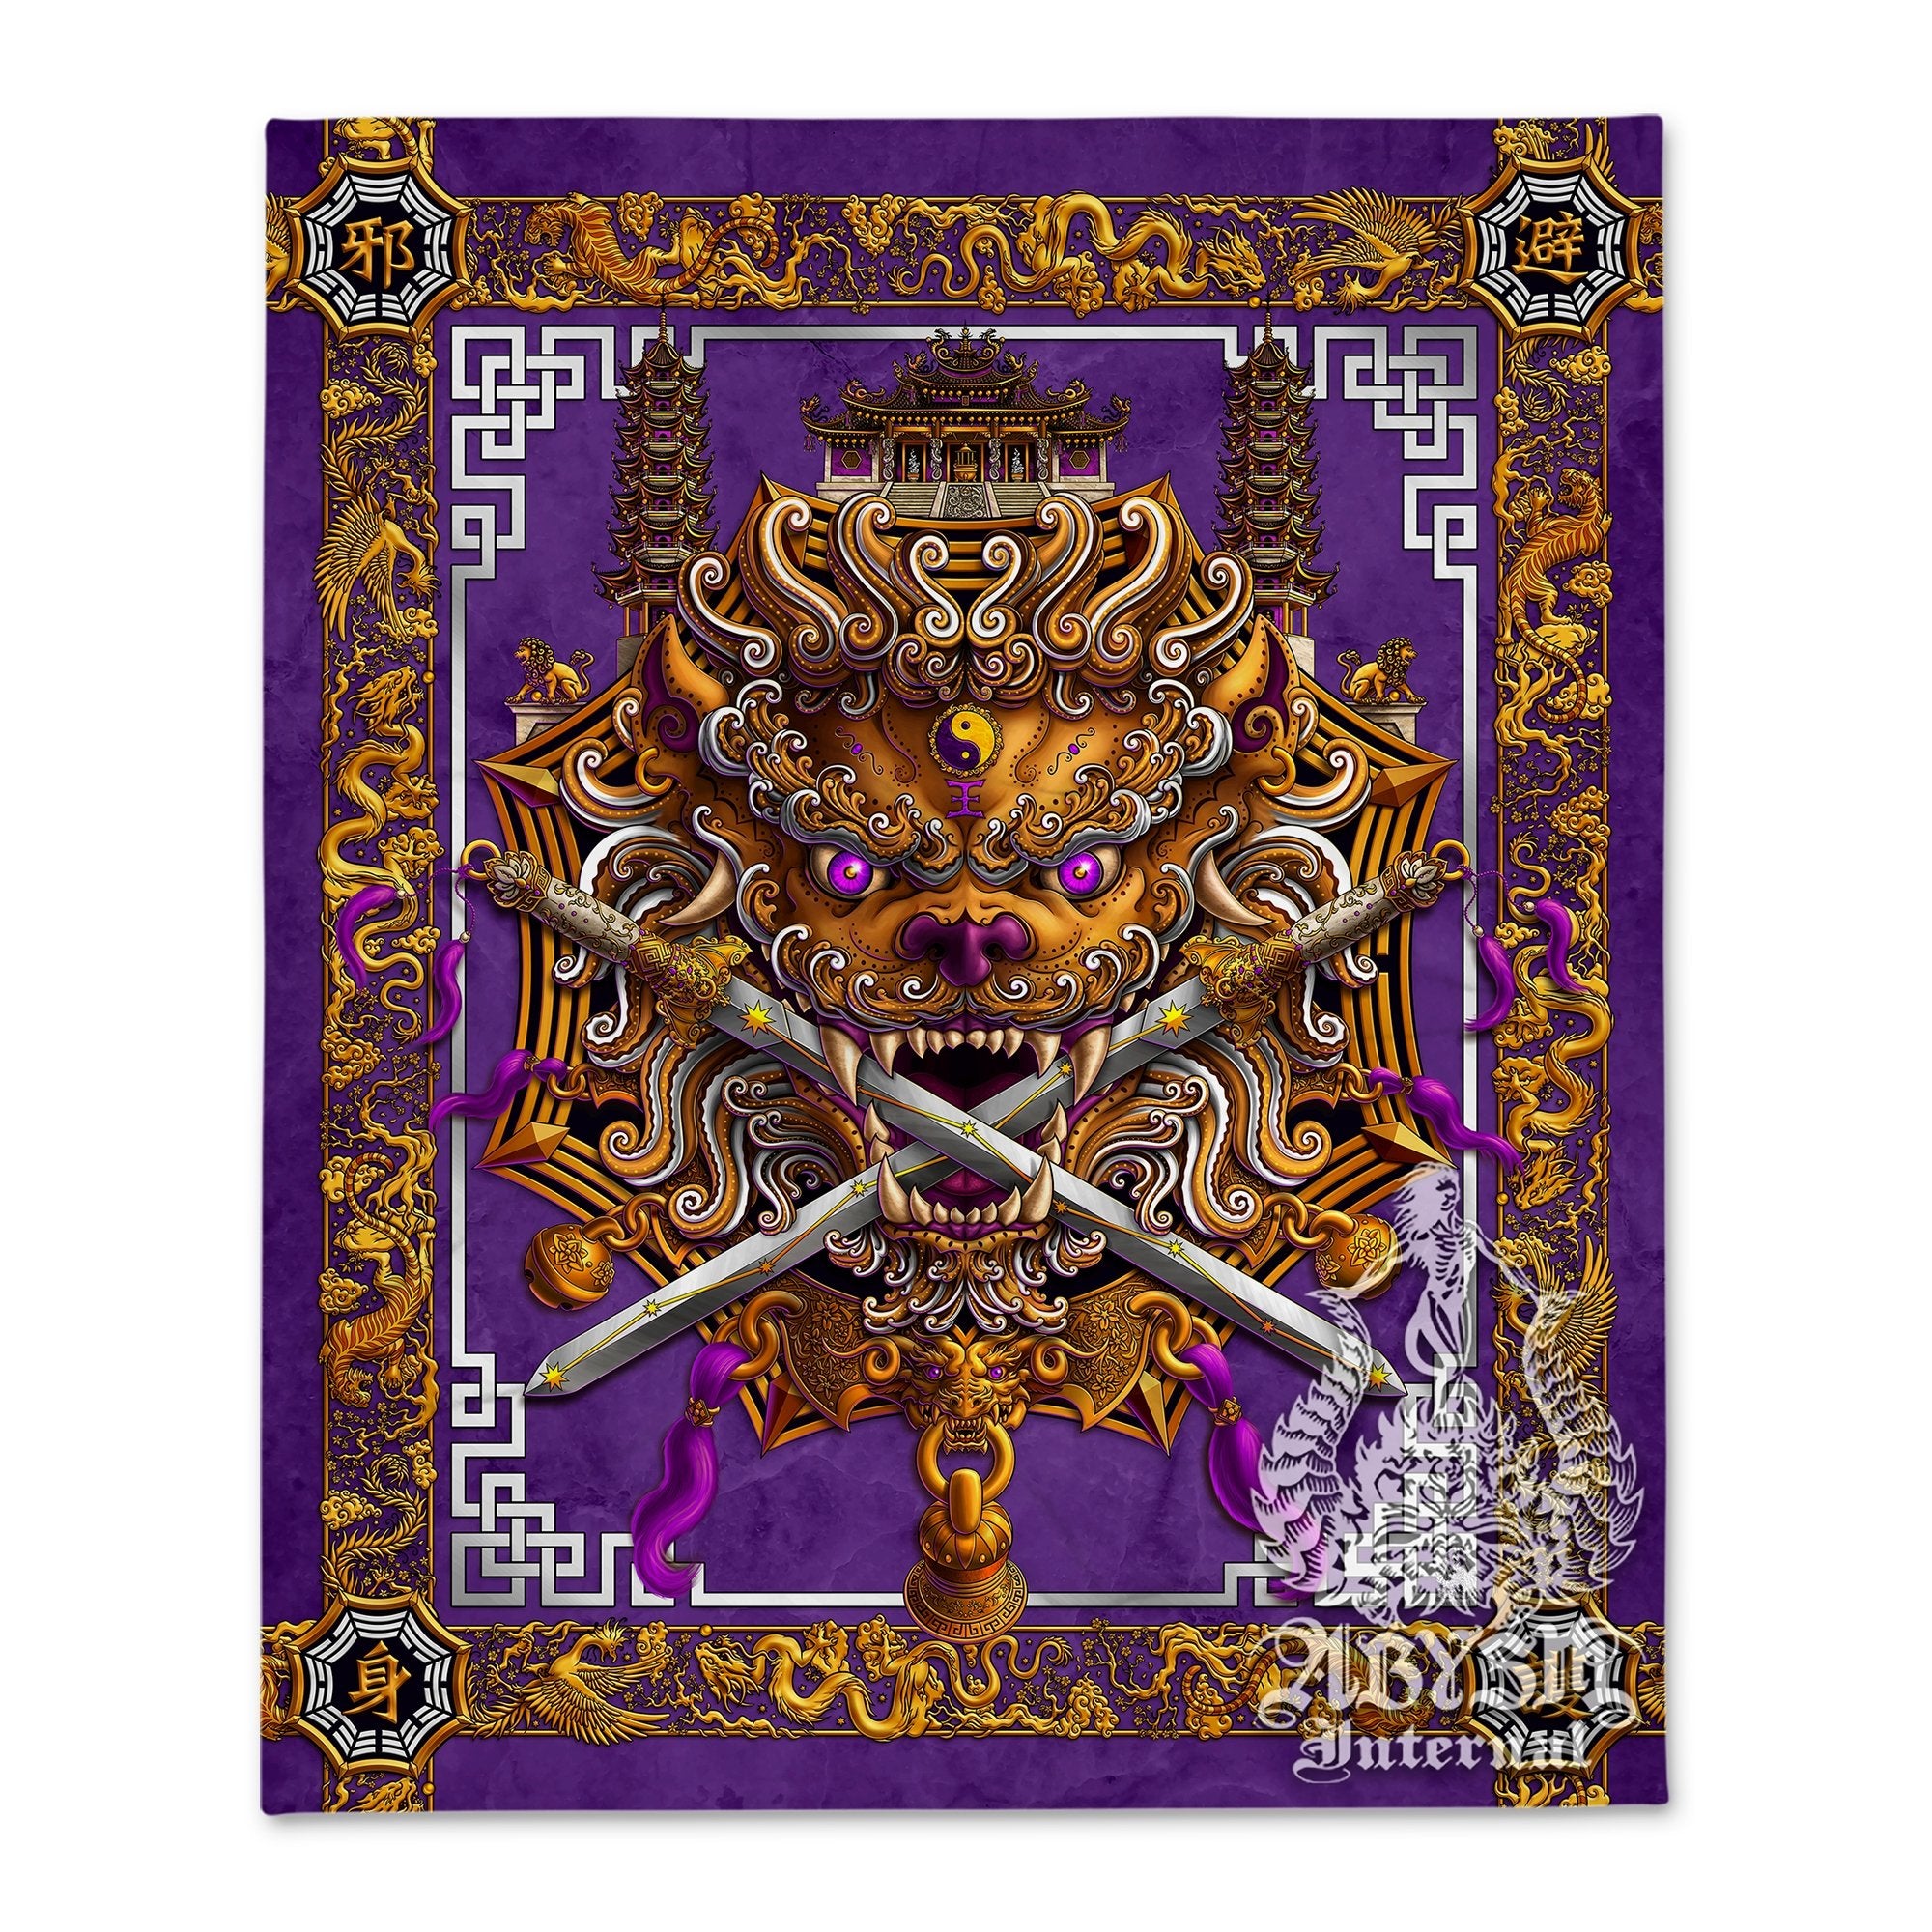 Lion Tapestry, Taiwan Sword Lion, Chinese Wall Hanging, Gamer Home Decor, Asian Mythology - Purple, White and Gold - Abysm Internal